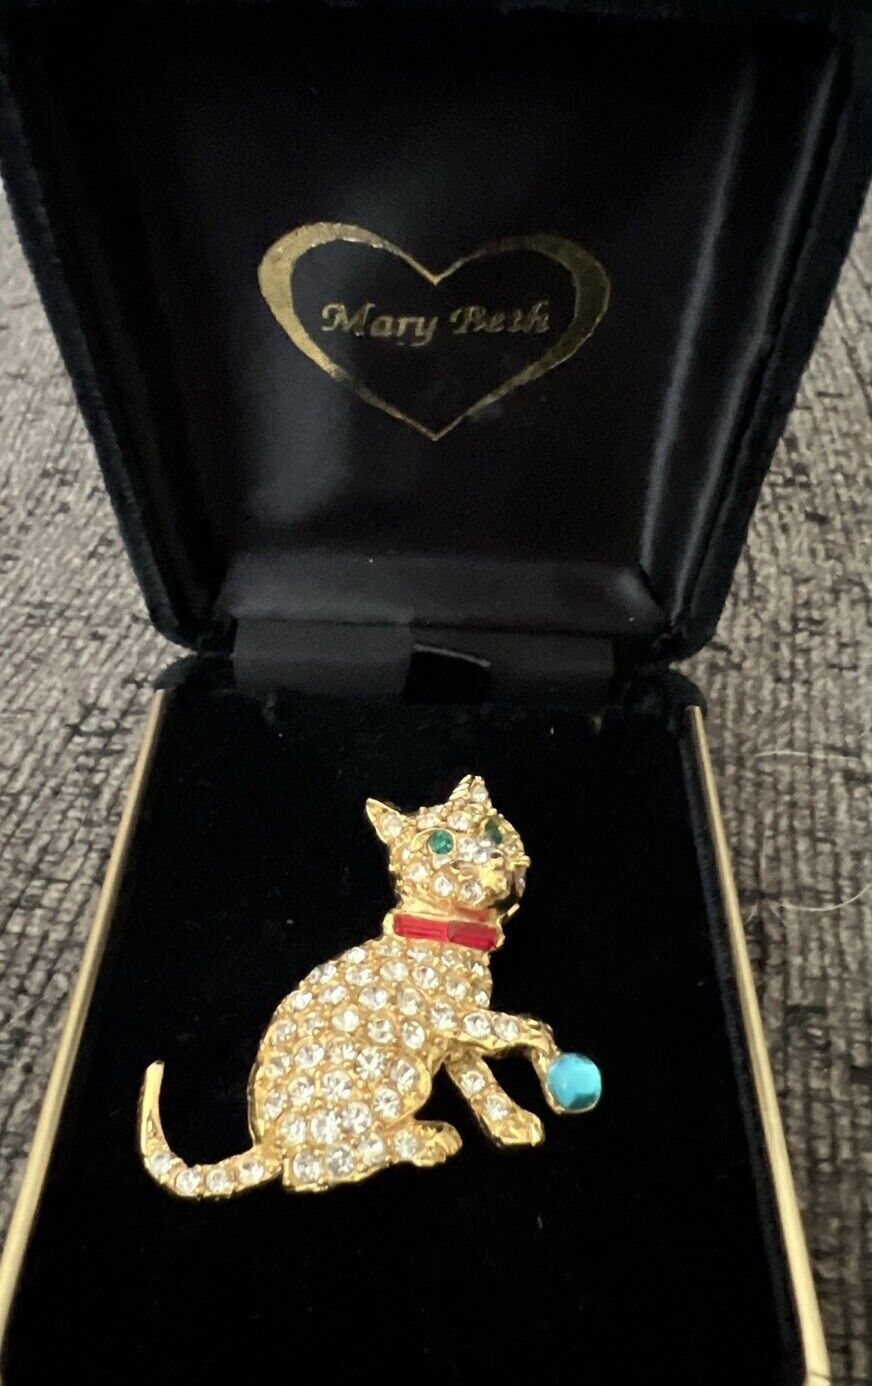 Vintage, Rare Swarovski “Playful Kitty” Brooch By Mary Beth In Box With Papers